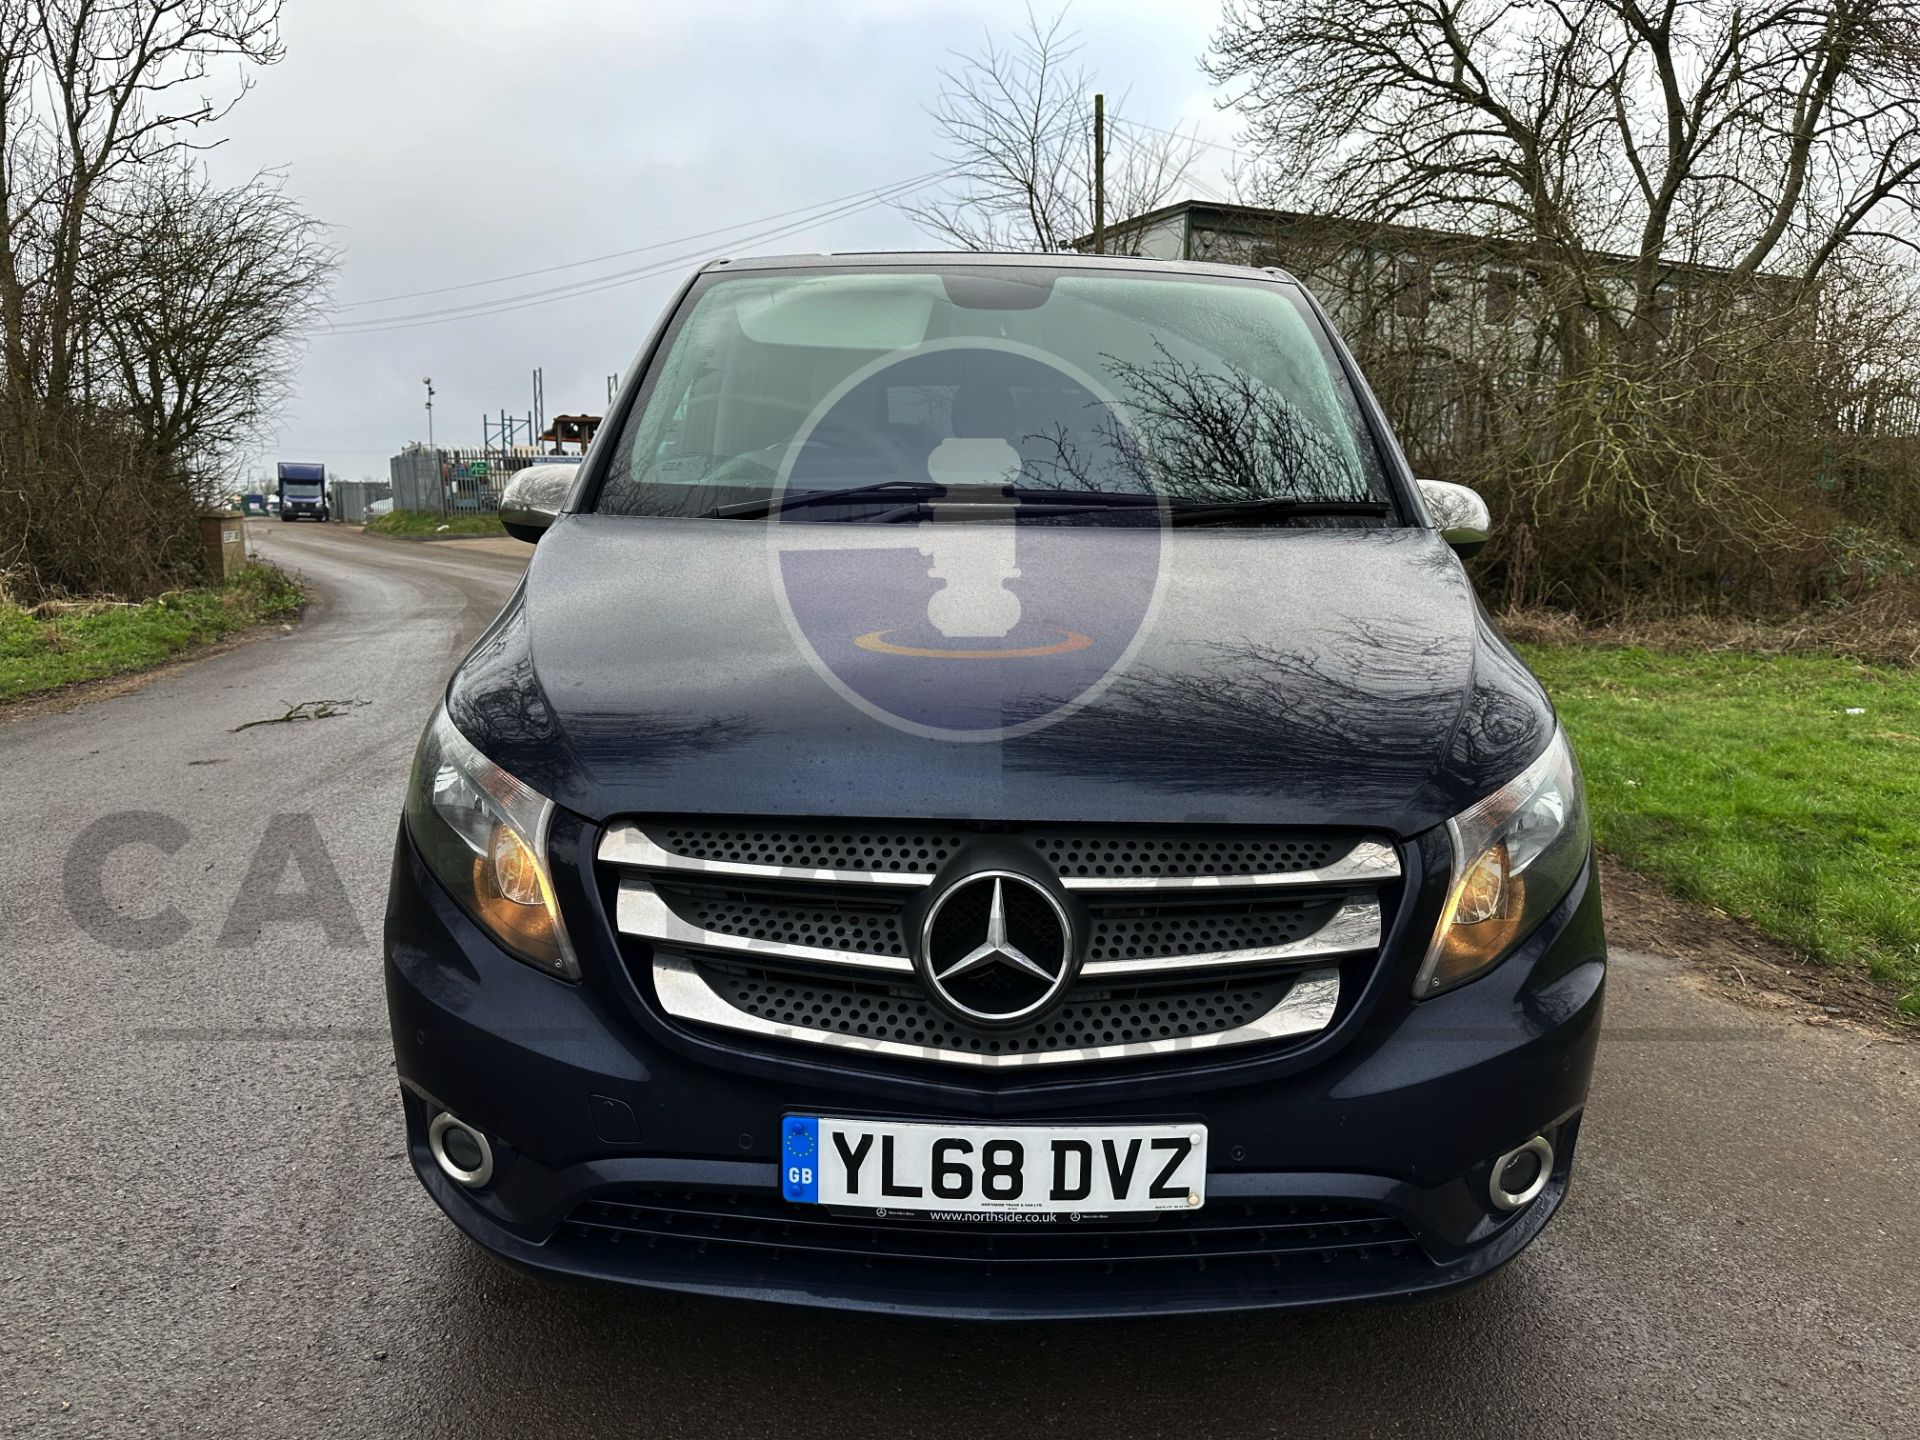 (ON SALE) MERCEDES-BENZ VITO 119 CDI AUTO *SWB - 5 SEATER DUALINER* (2019 - EURO 6) *SPORT EDITION* - Image 4 of 44